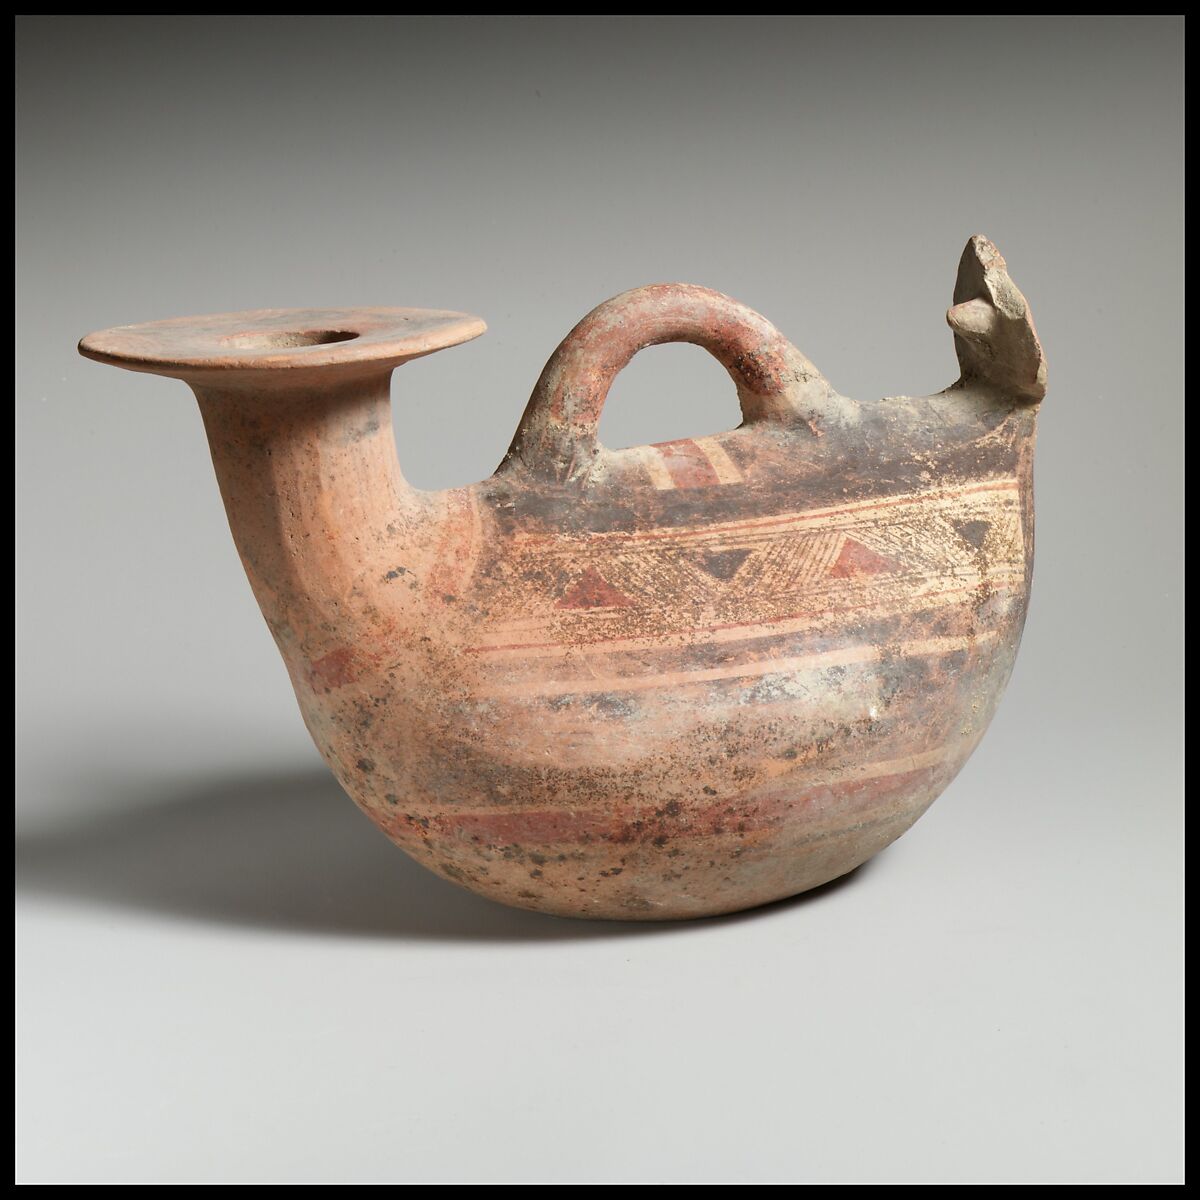 Terracotta askos (flask with a spout and handle over the top), Terracotta, Native Italic, Daunian 